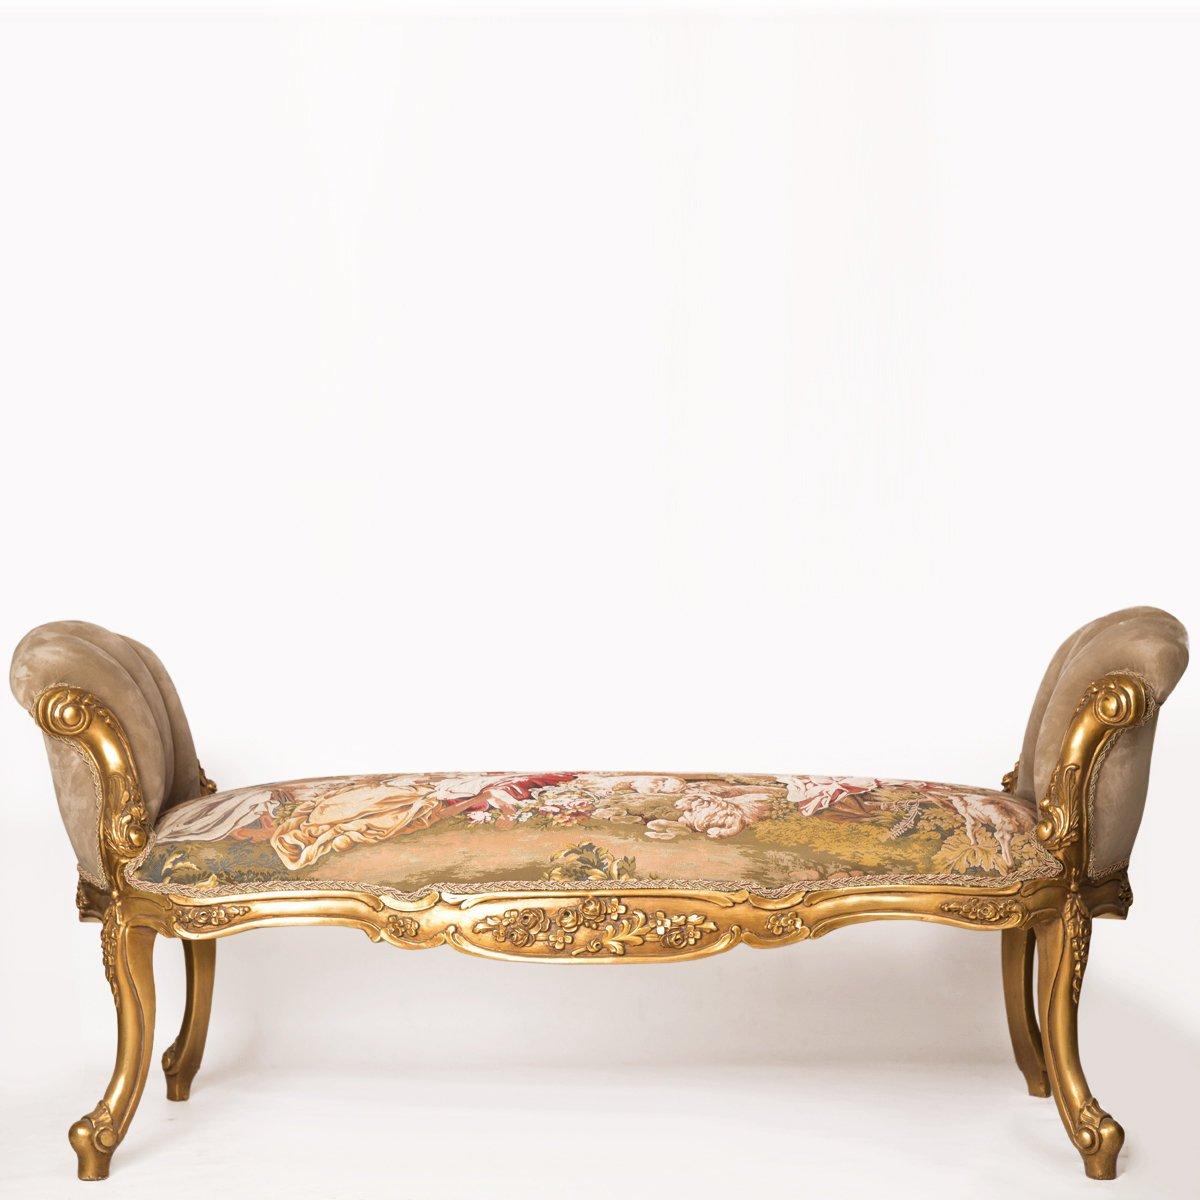 A beautiful Récamier chaise lounge with padded arms, 20th century.

Our handmade Rècamier chaise lounge will absolutely be your best choice if you are looking for a French style furniture that mixes between luxury and comfort. The chaise lounge